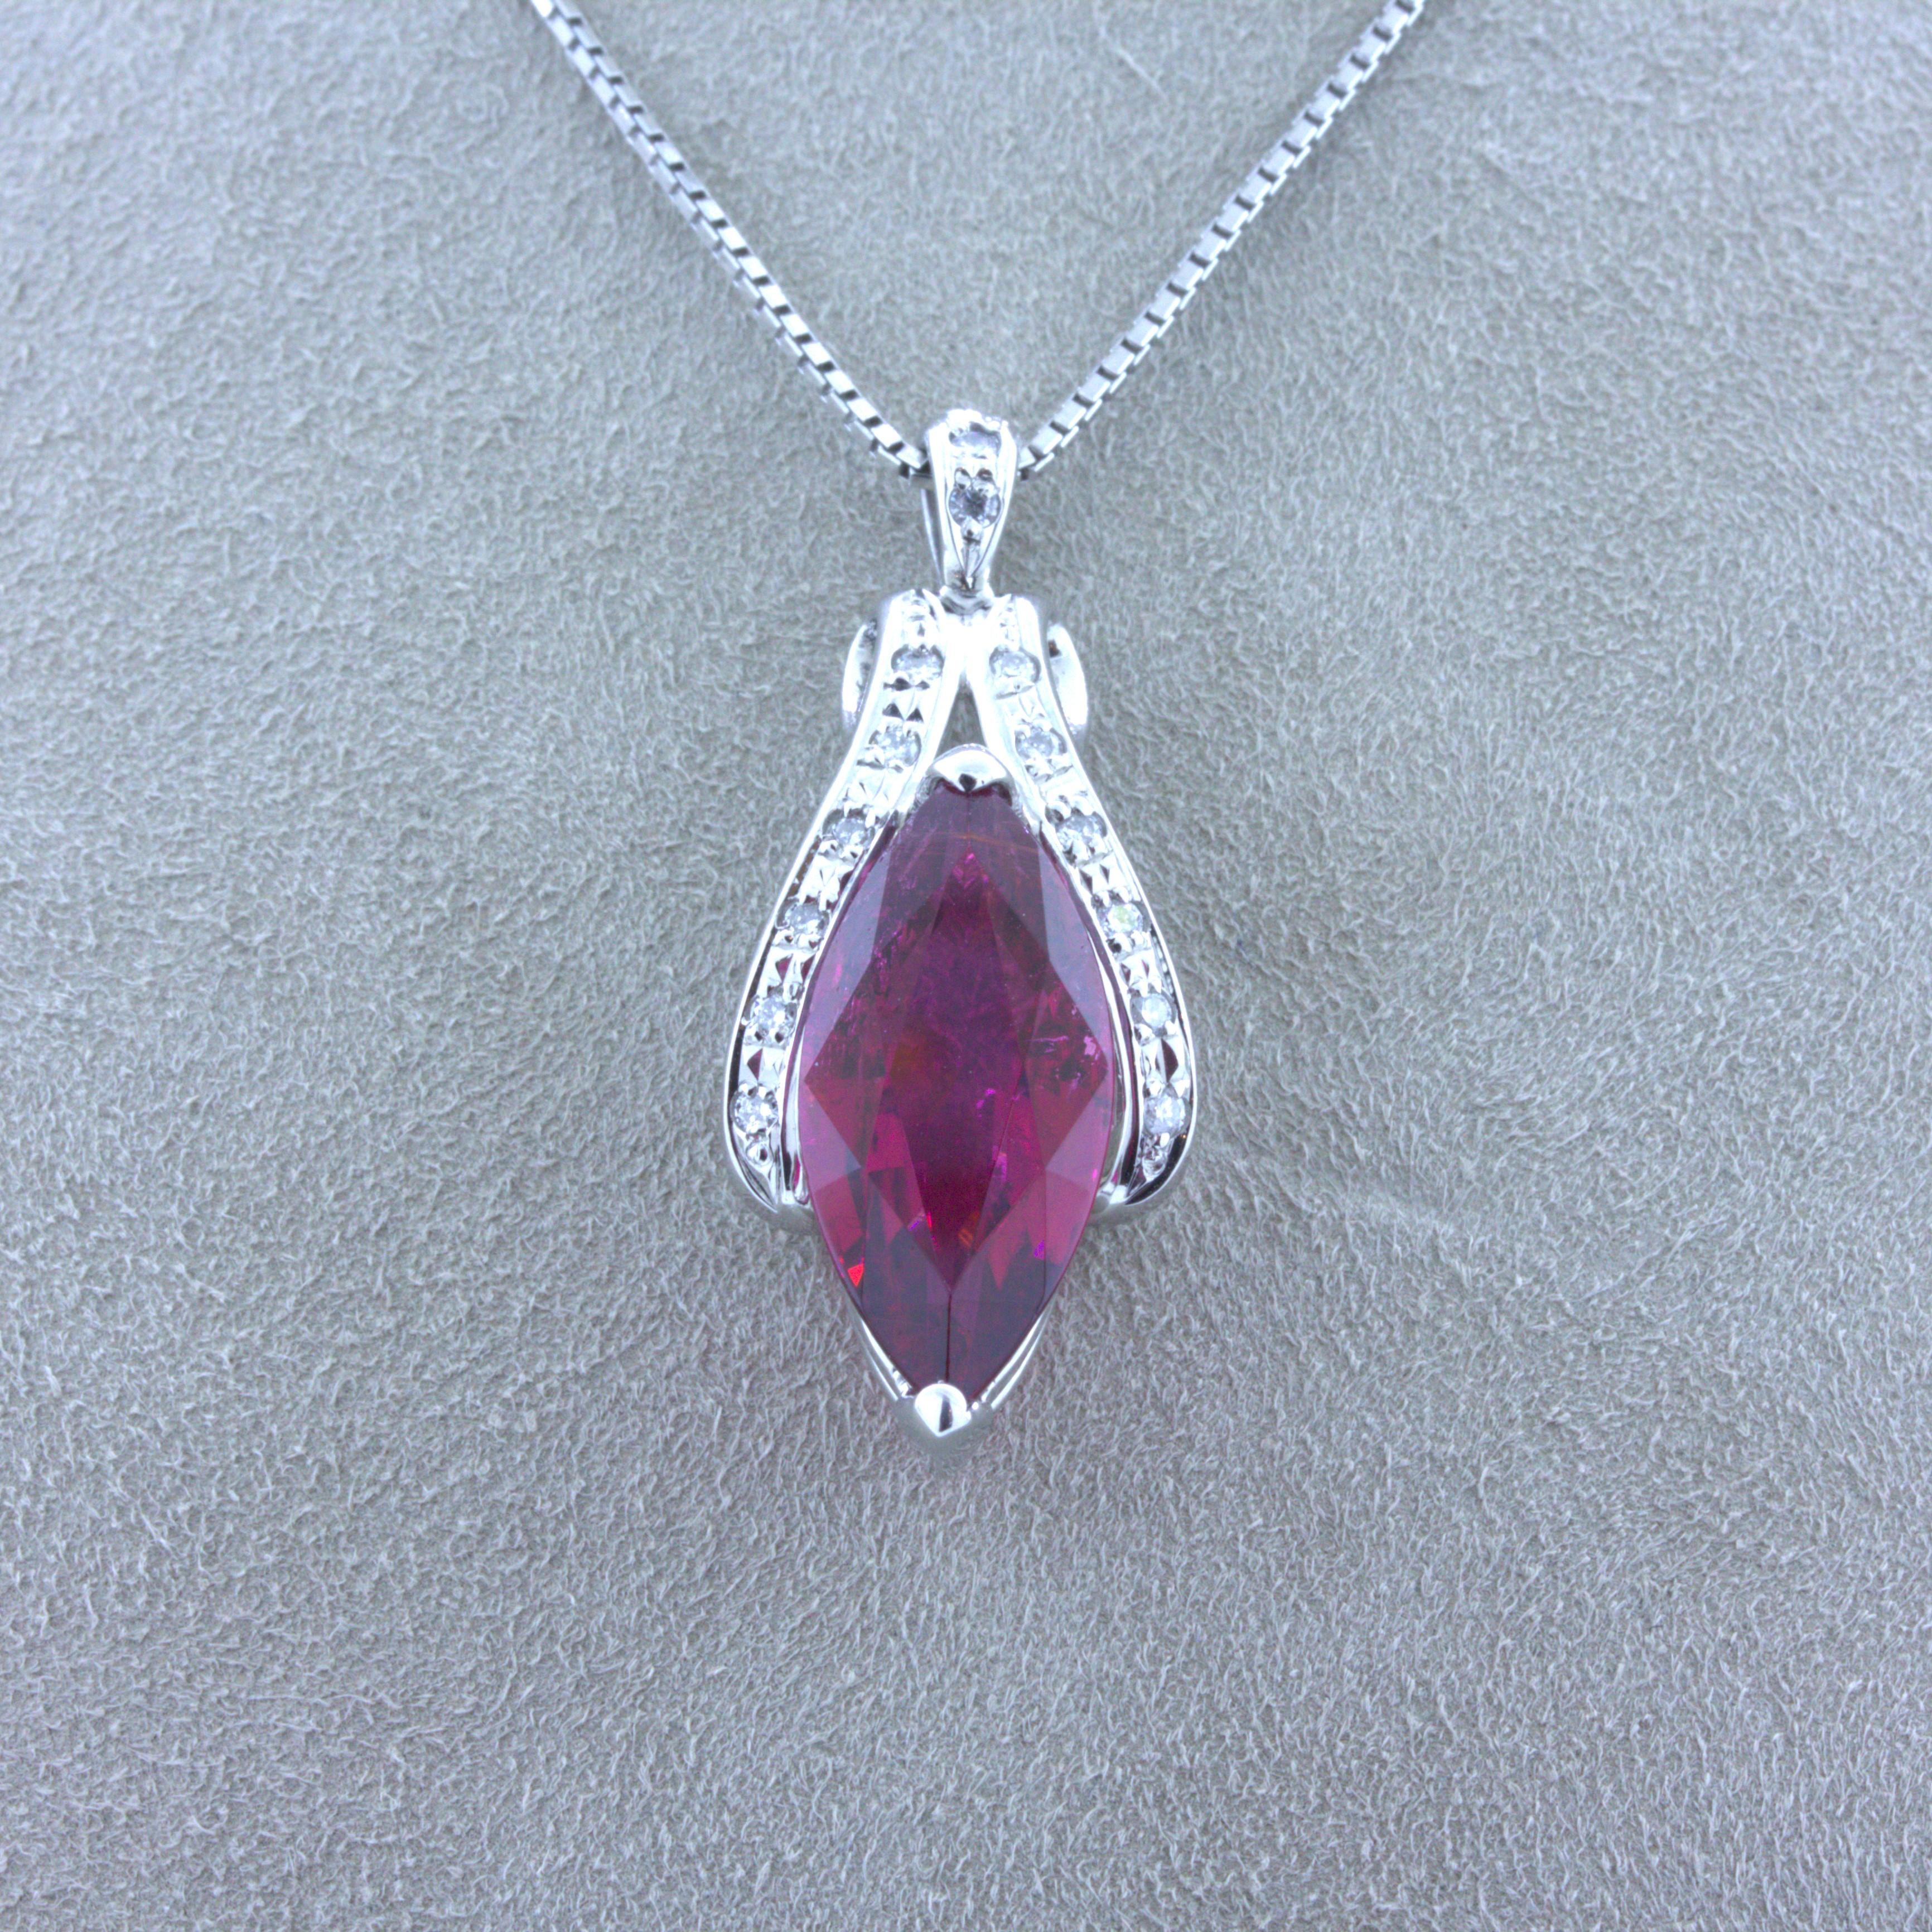 A chic and elegant pendant made in platinum featuring a very fine 6.42 carat rubellite tourmaline. It has a sleek marquise-shape along with extra fine vivid red color with a hint of purple which glows intensely in the light. It is complemented by